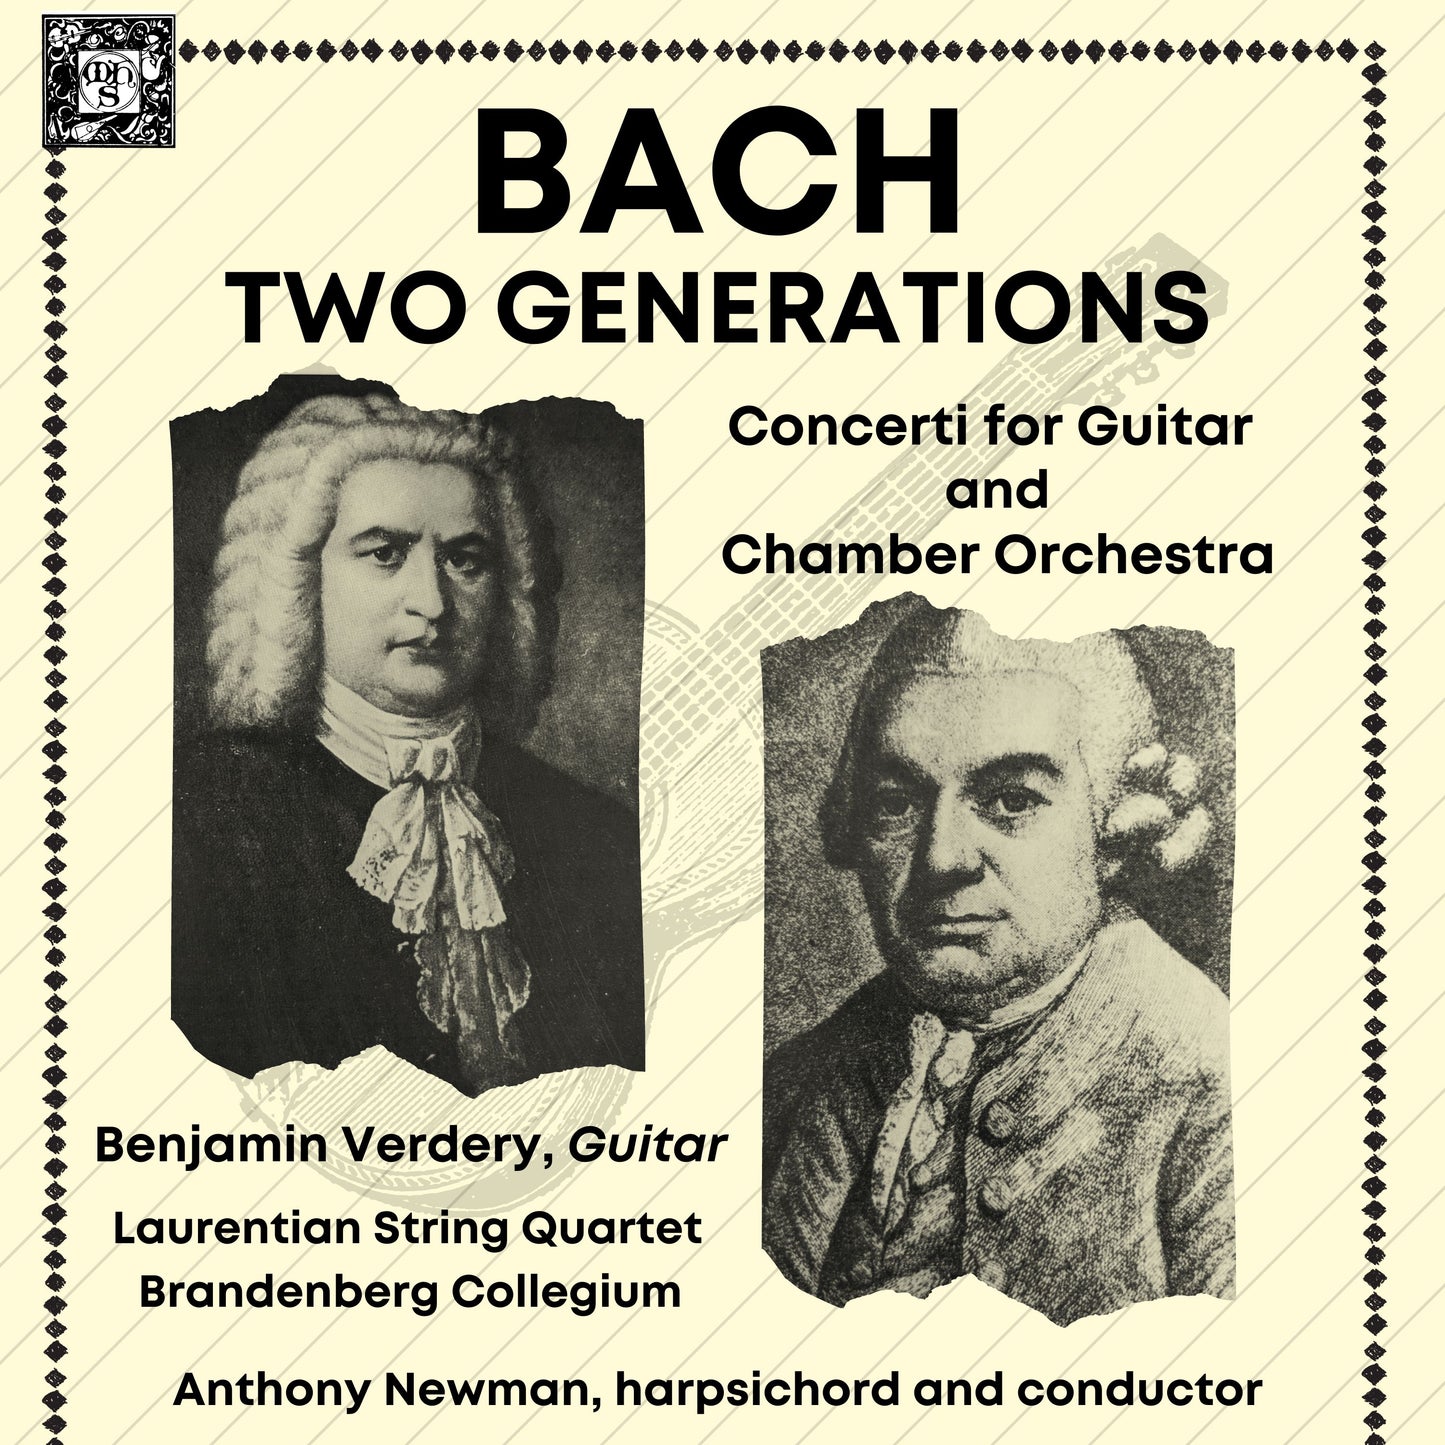 BACH: TWO GENERATIONS (Concerti for Guitar and Chamber Orchestra) - Benjamin Verdery, Anthony Newman, Brandenberg Collegium, Laurentian String Quartet